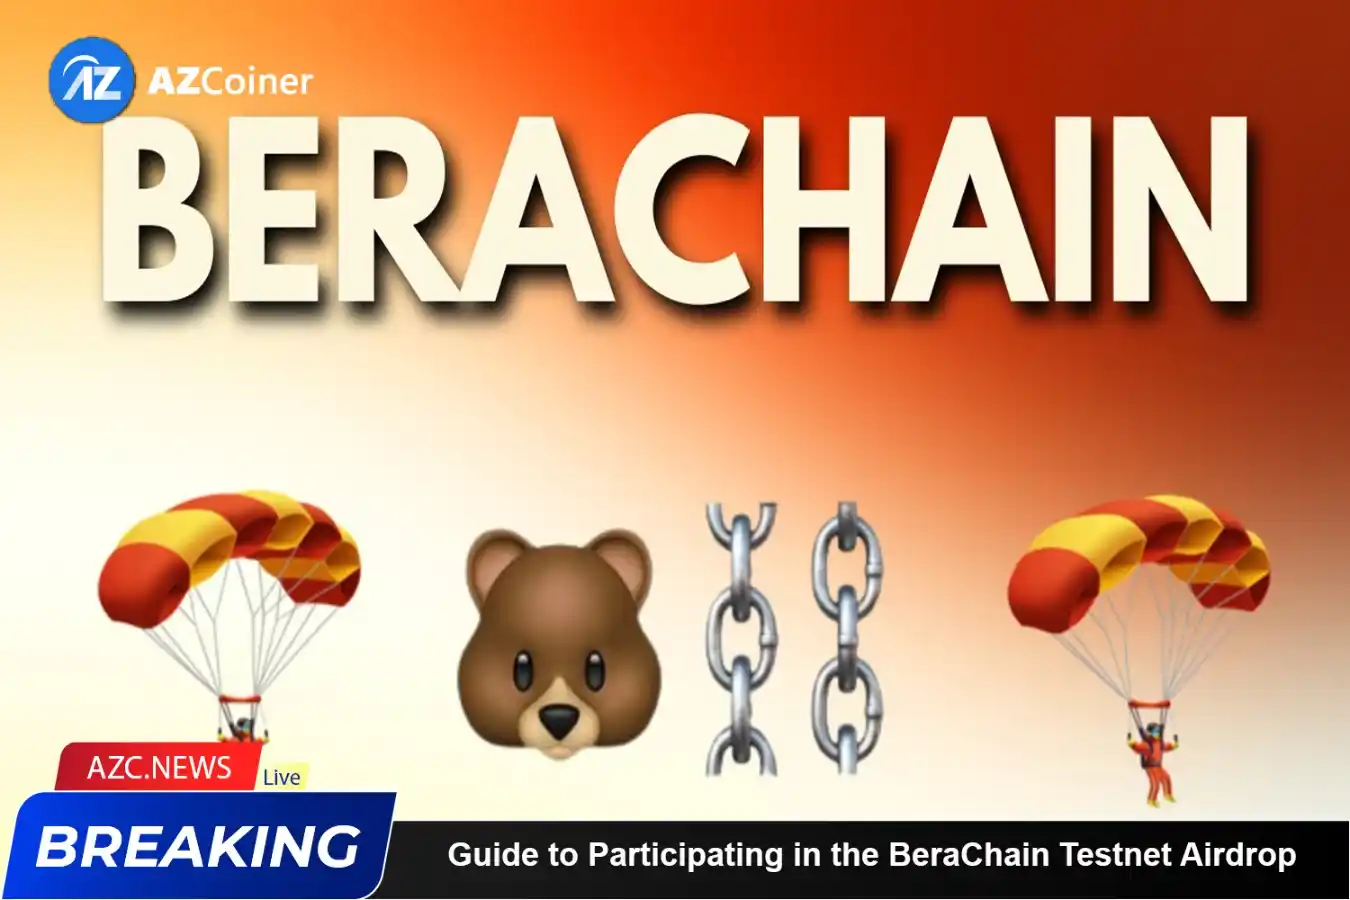 Guide To Participating In The Berachain Testnet Airdrop_65d5e2af0baaf.webp